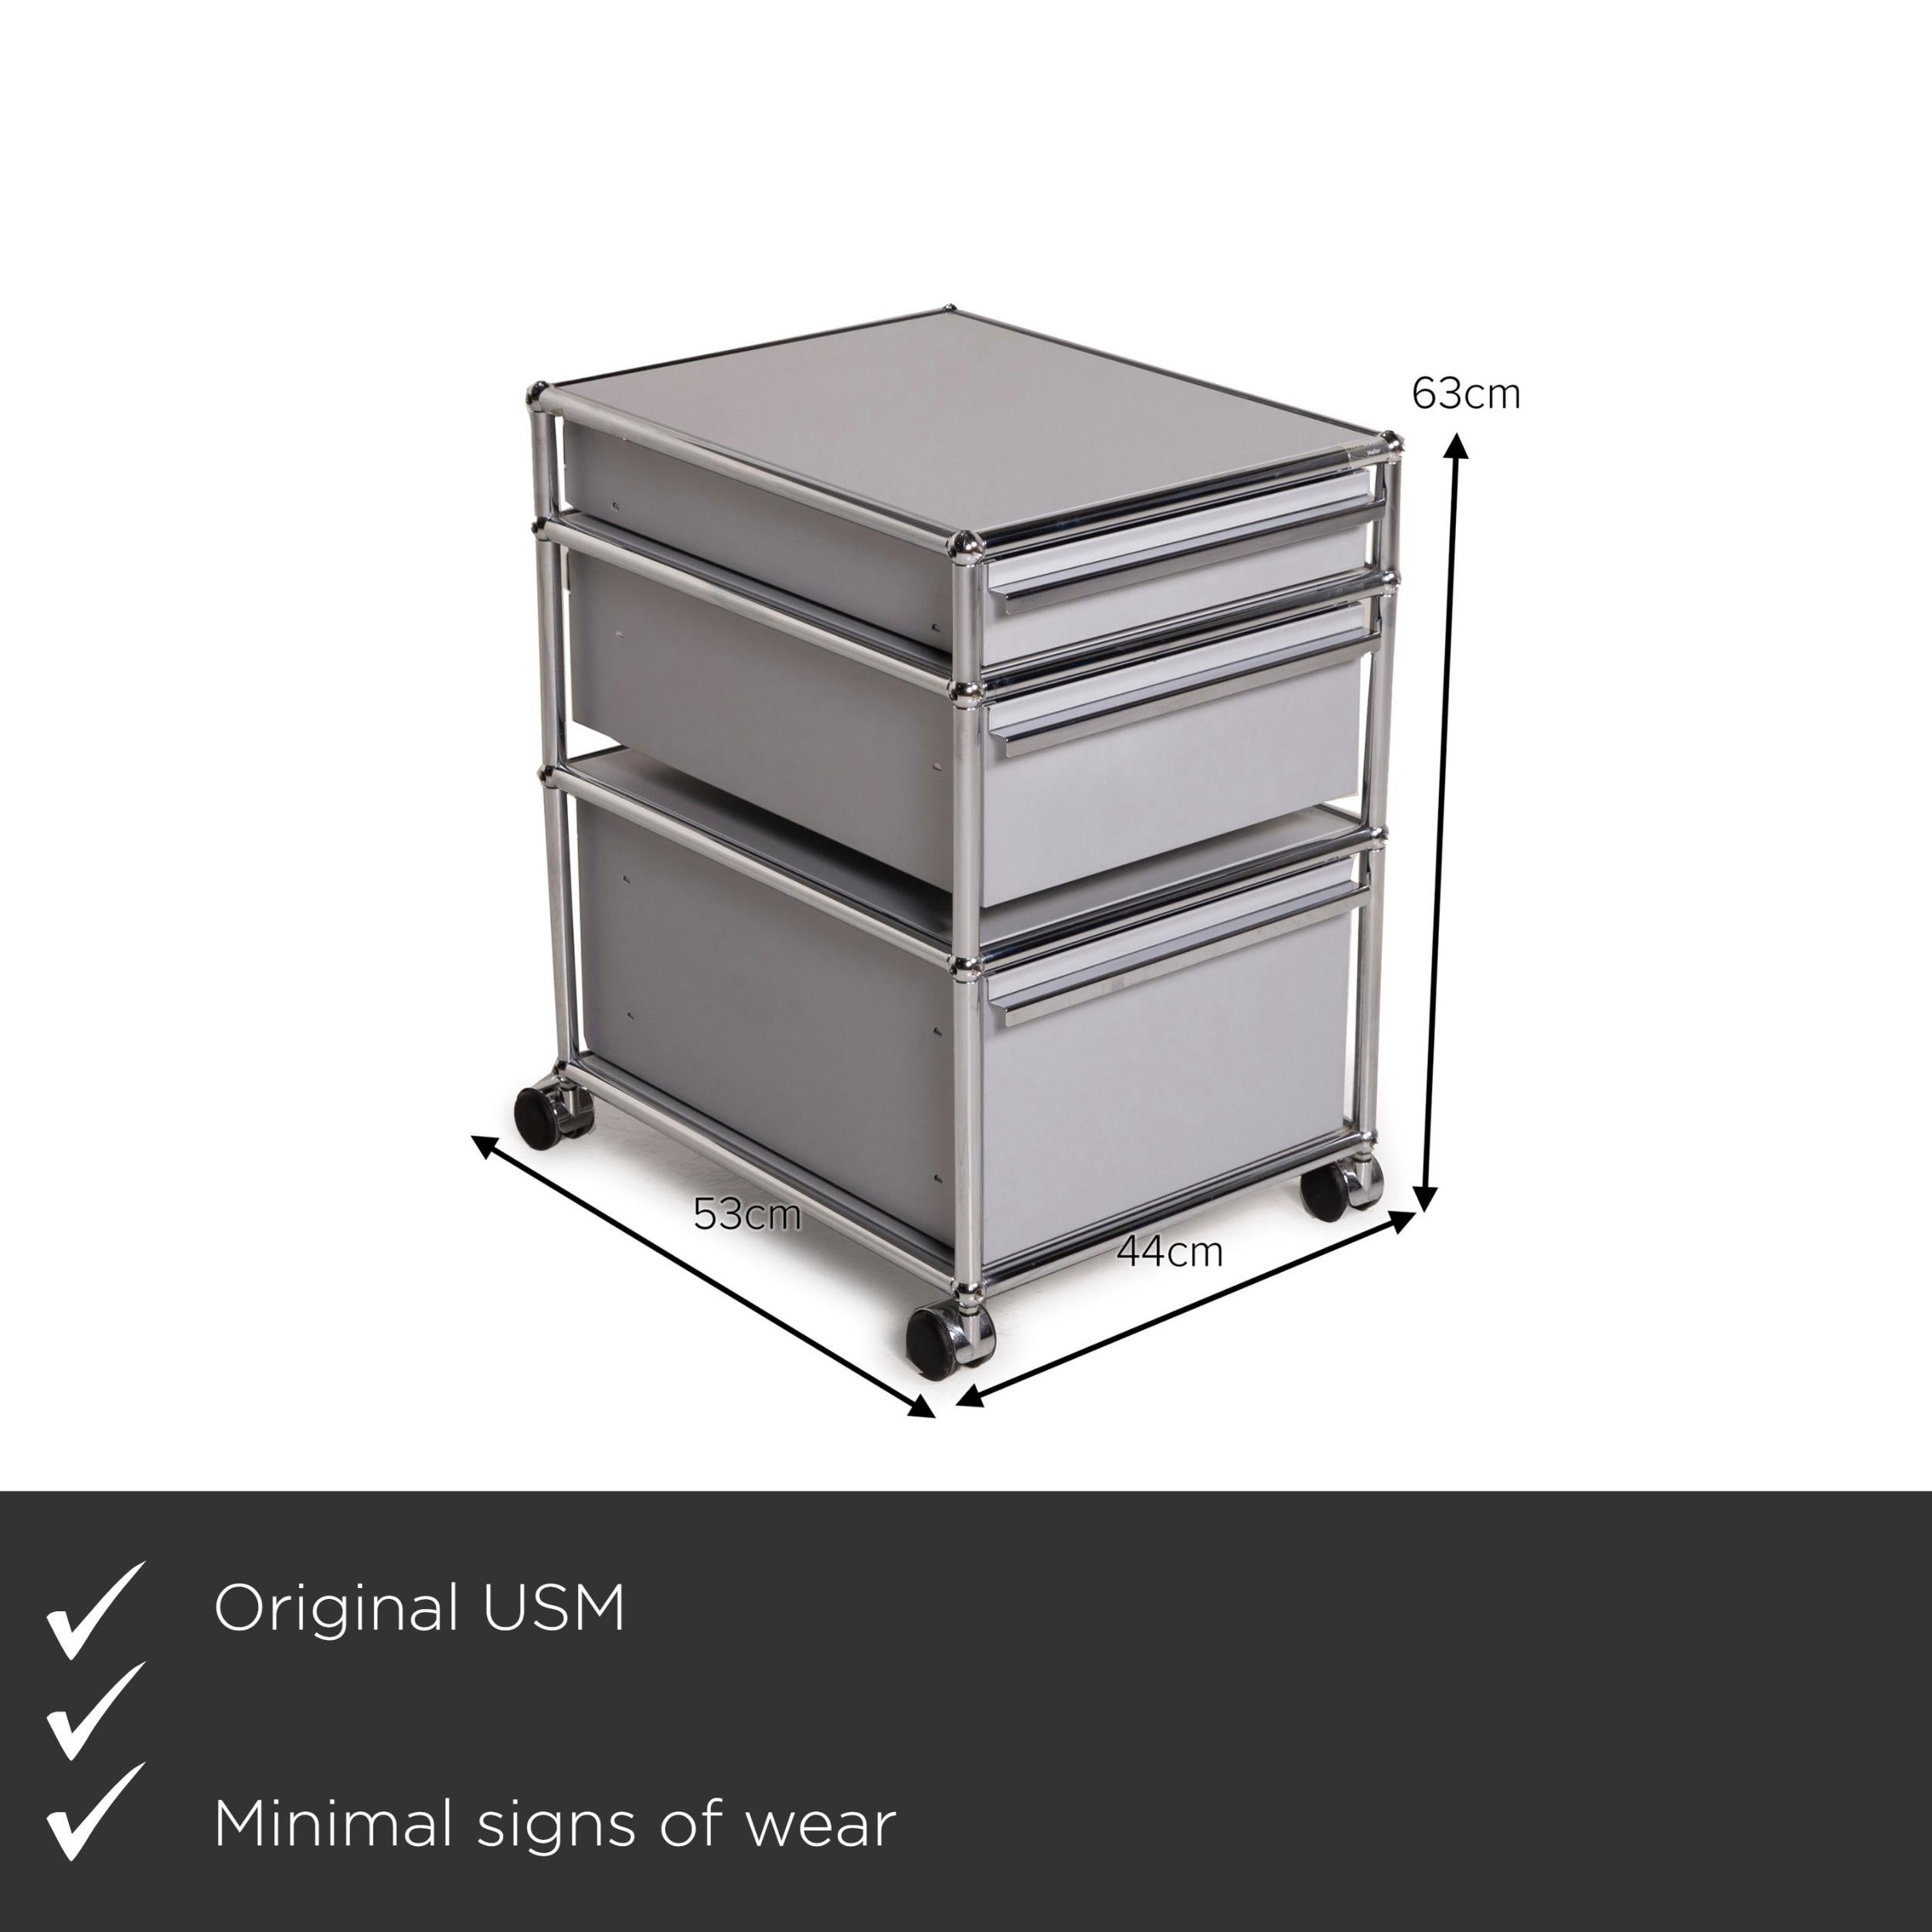 We present to you an USM Haller metal sideboard gray roll container drawer compartment chrome office.


 Product measurements in centimeters:
 

 Depth: 53
 Width: 44
 Height: 63.





 